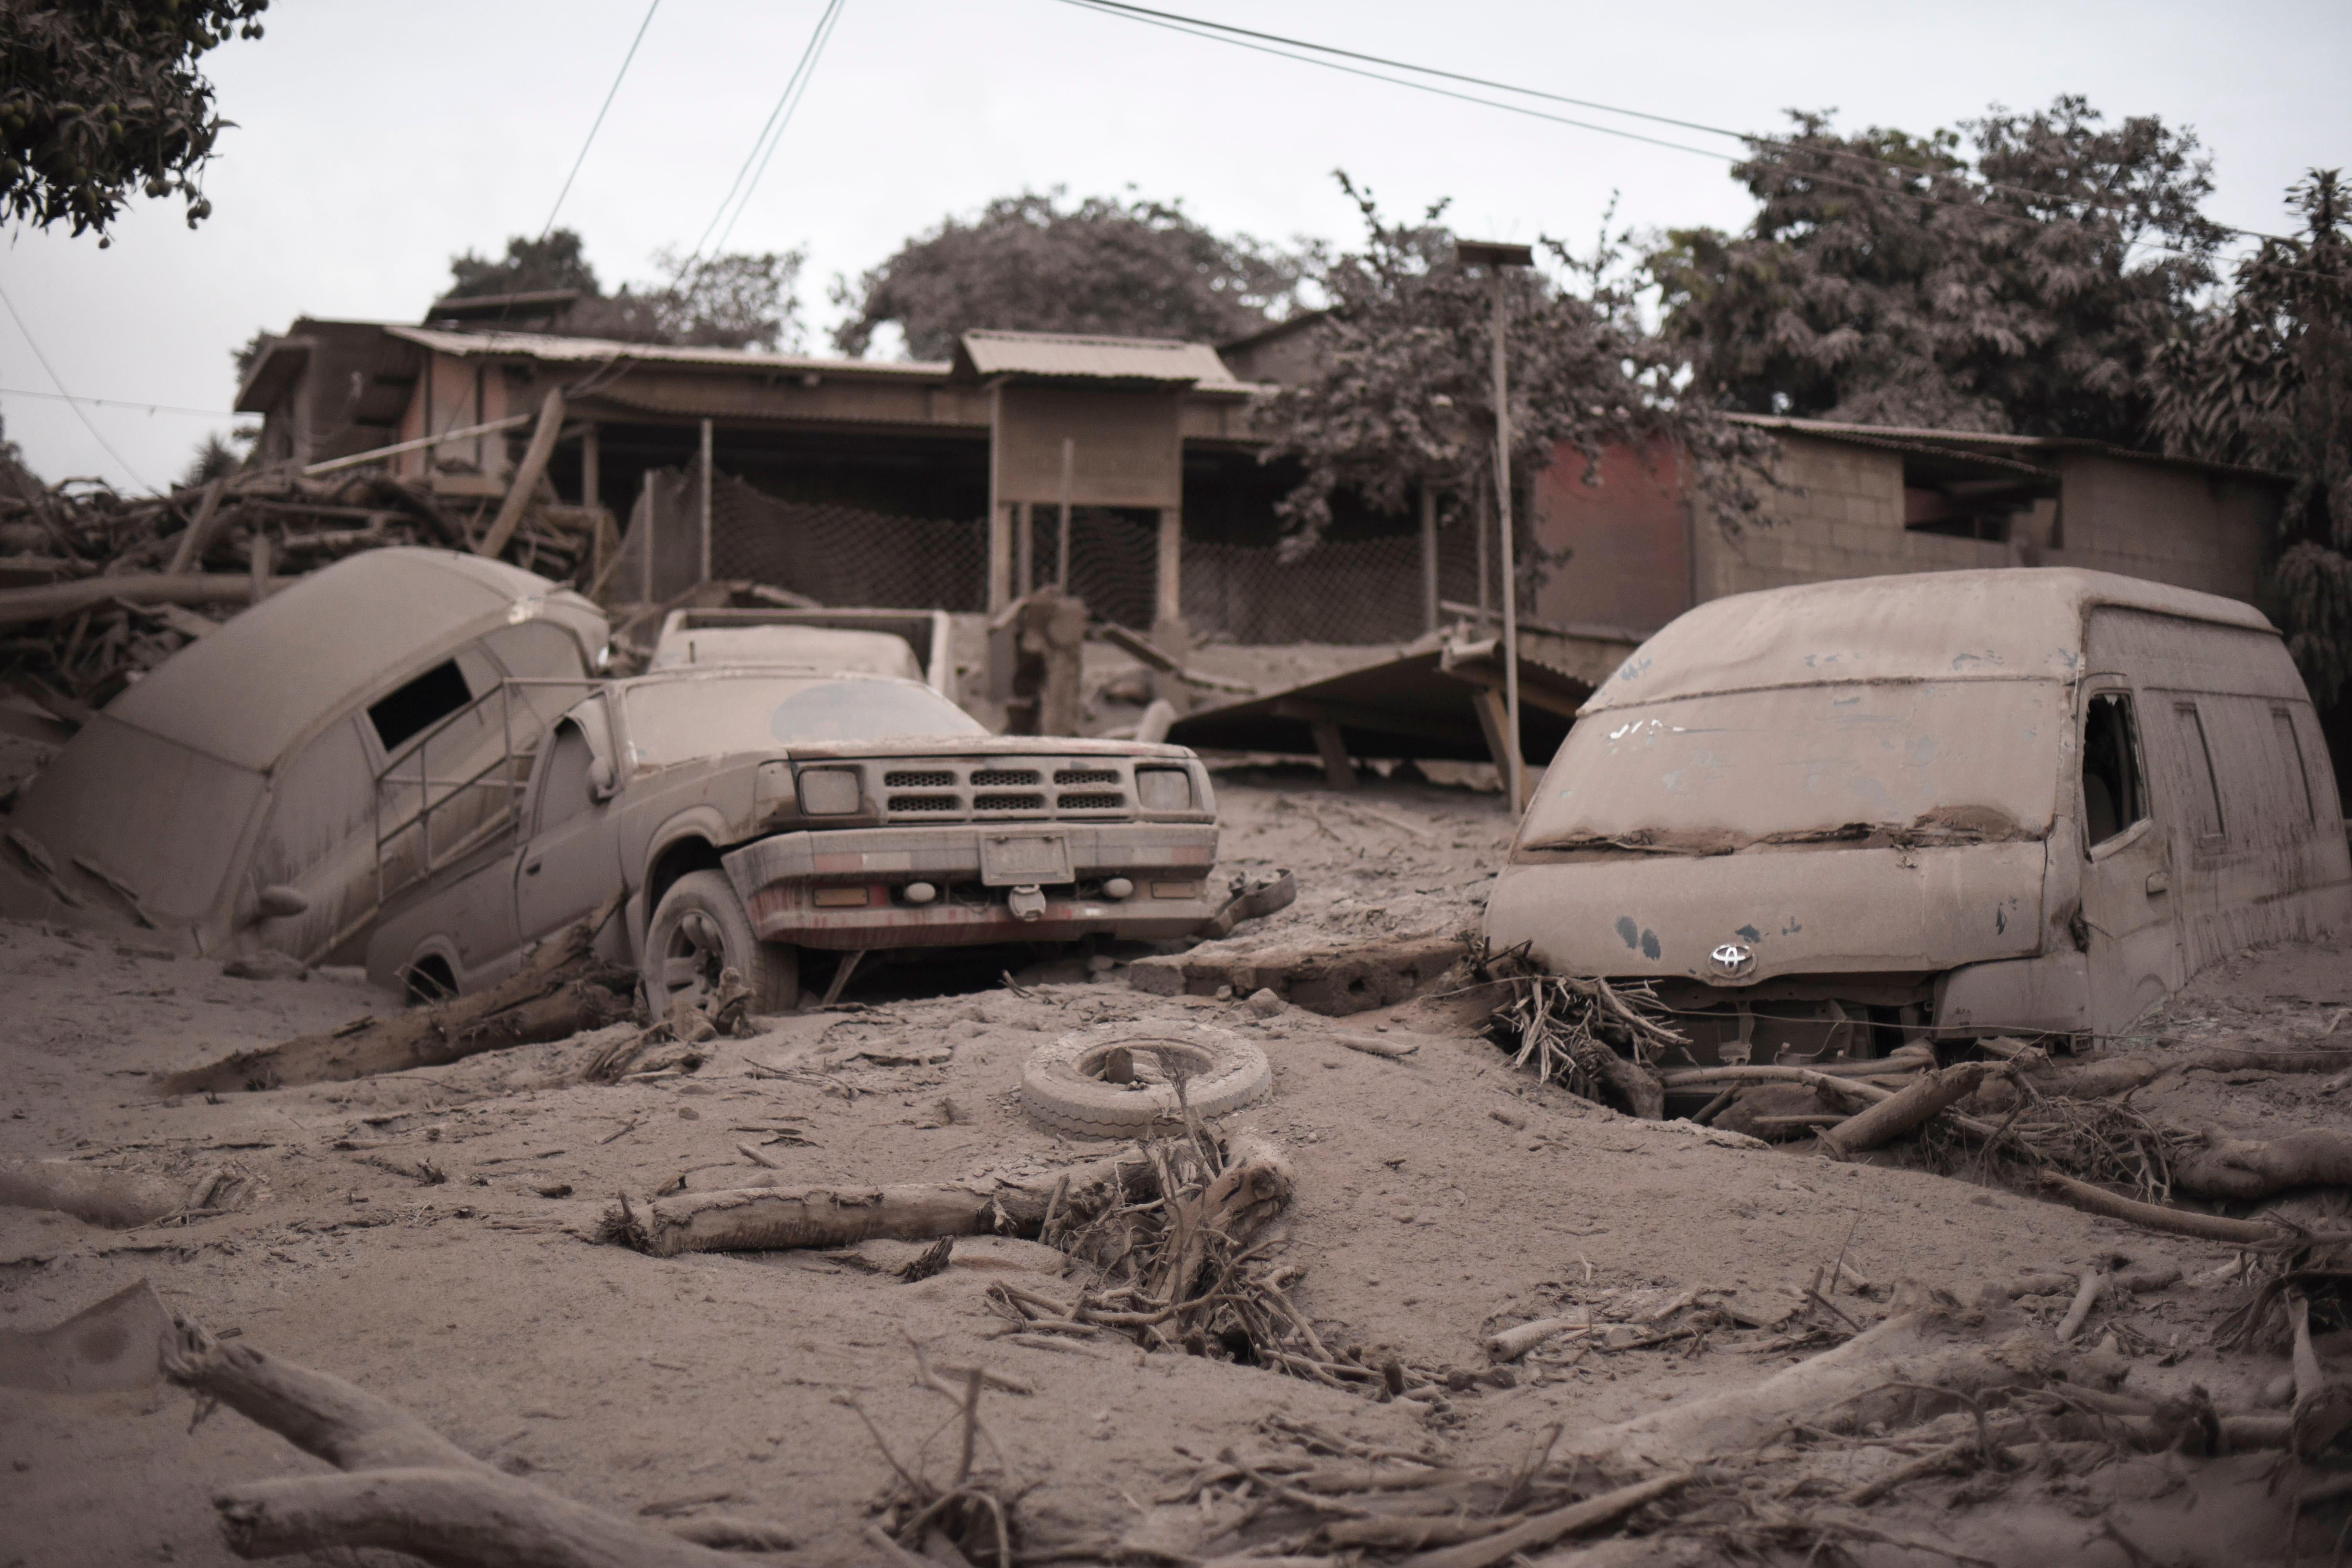 The aftermath of the eruption at the village of San Miguel Los Lotes